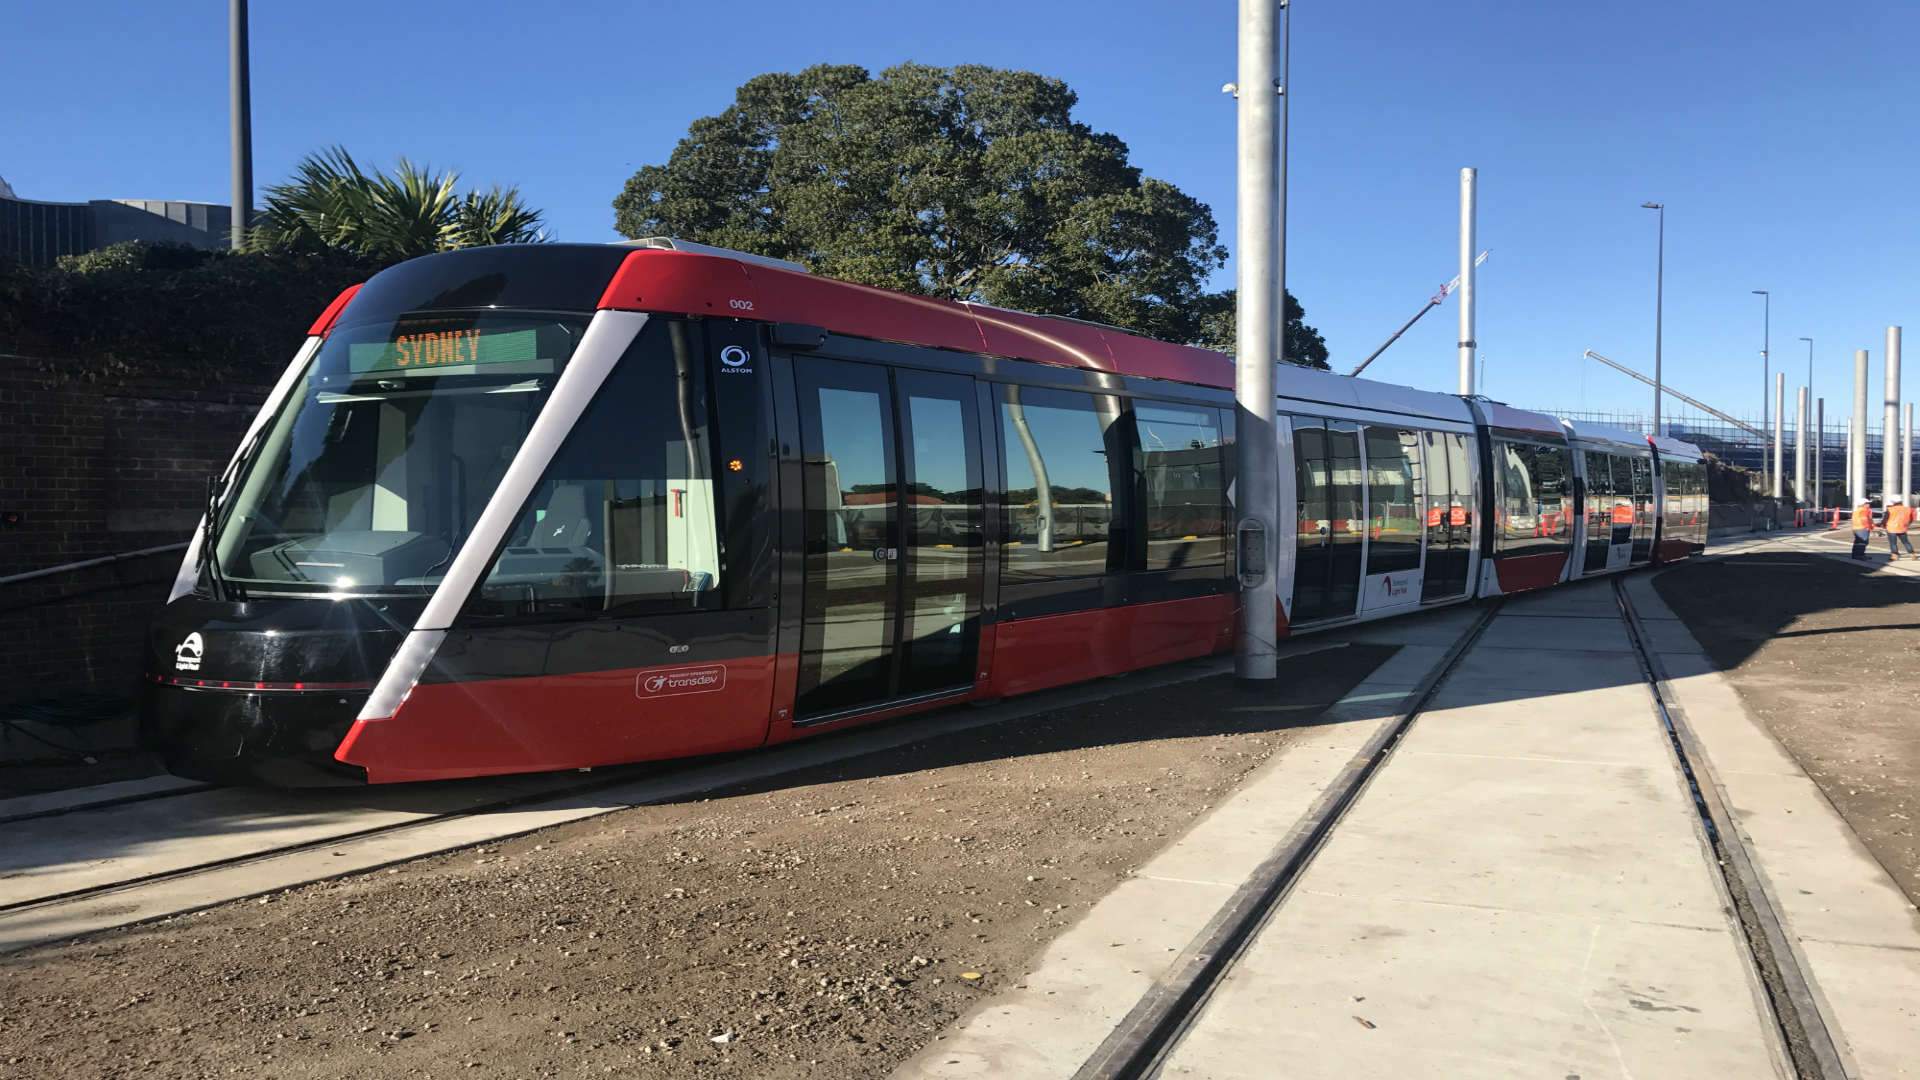 The First Trams on Sydney's Long-Awaited Southeast Light Rail Could Run by the End of the Year